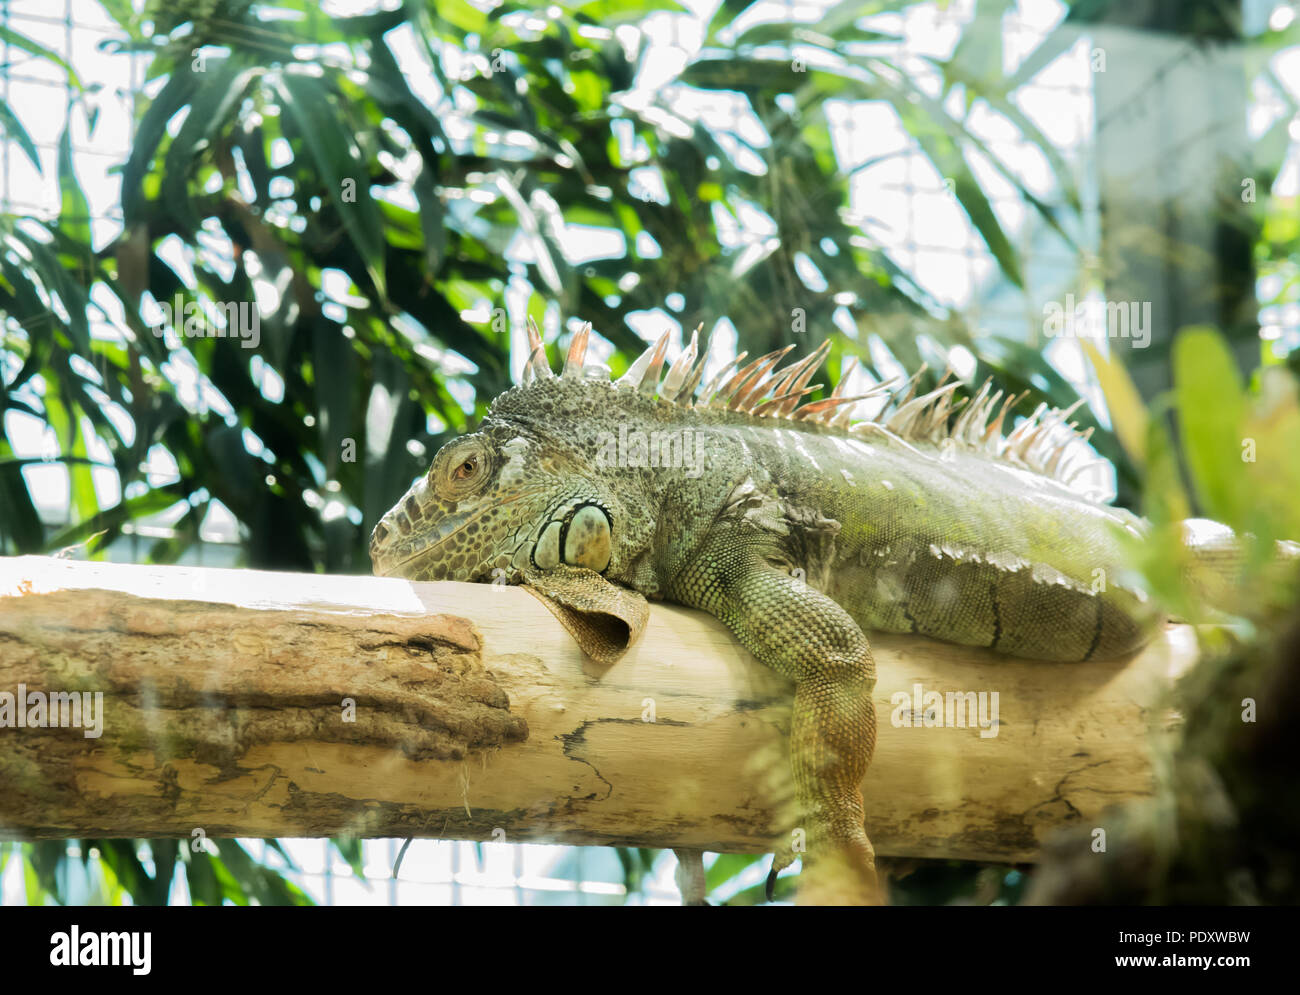 An Iguana, in a glass house display, resting on a wooden log in a ZOO, Zurich, with a tree and a fence in the background. Stock Photo